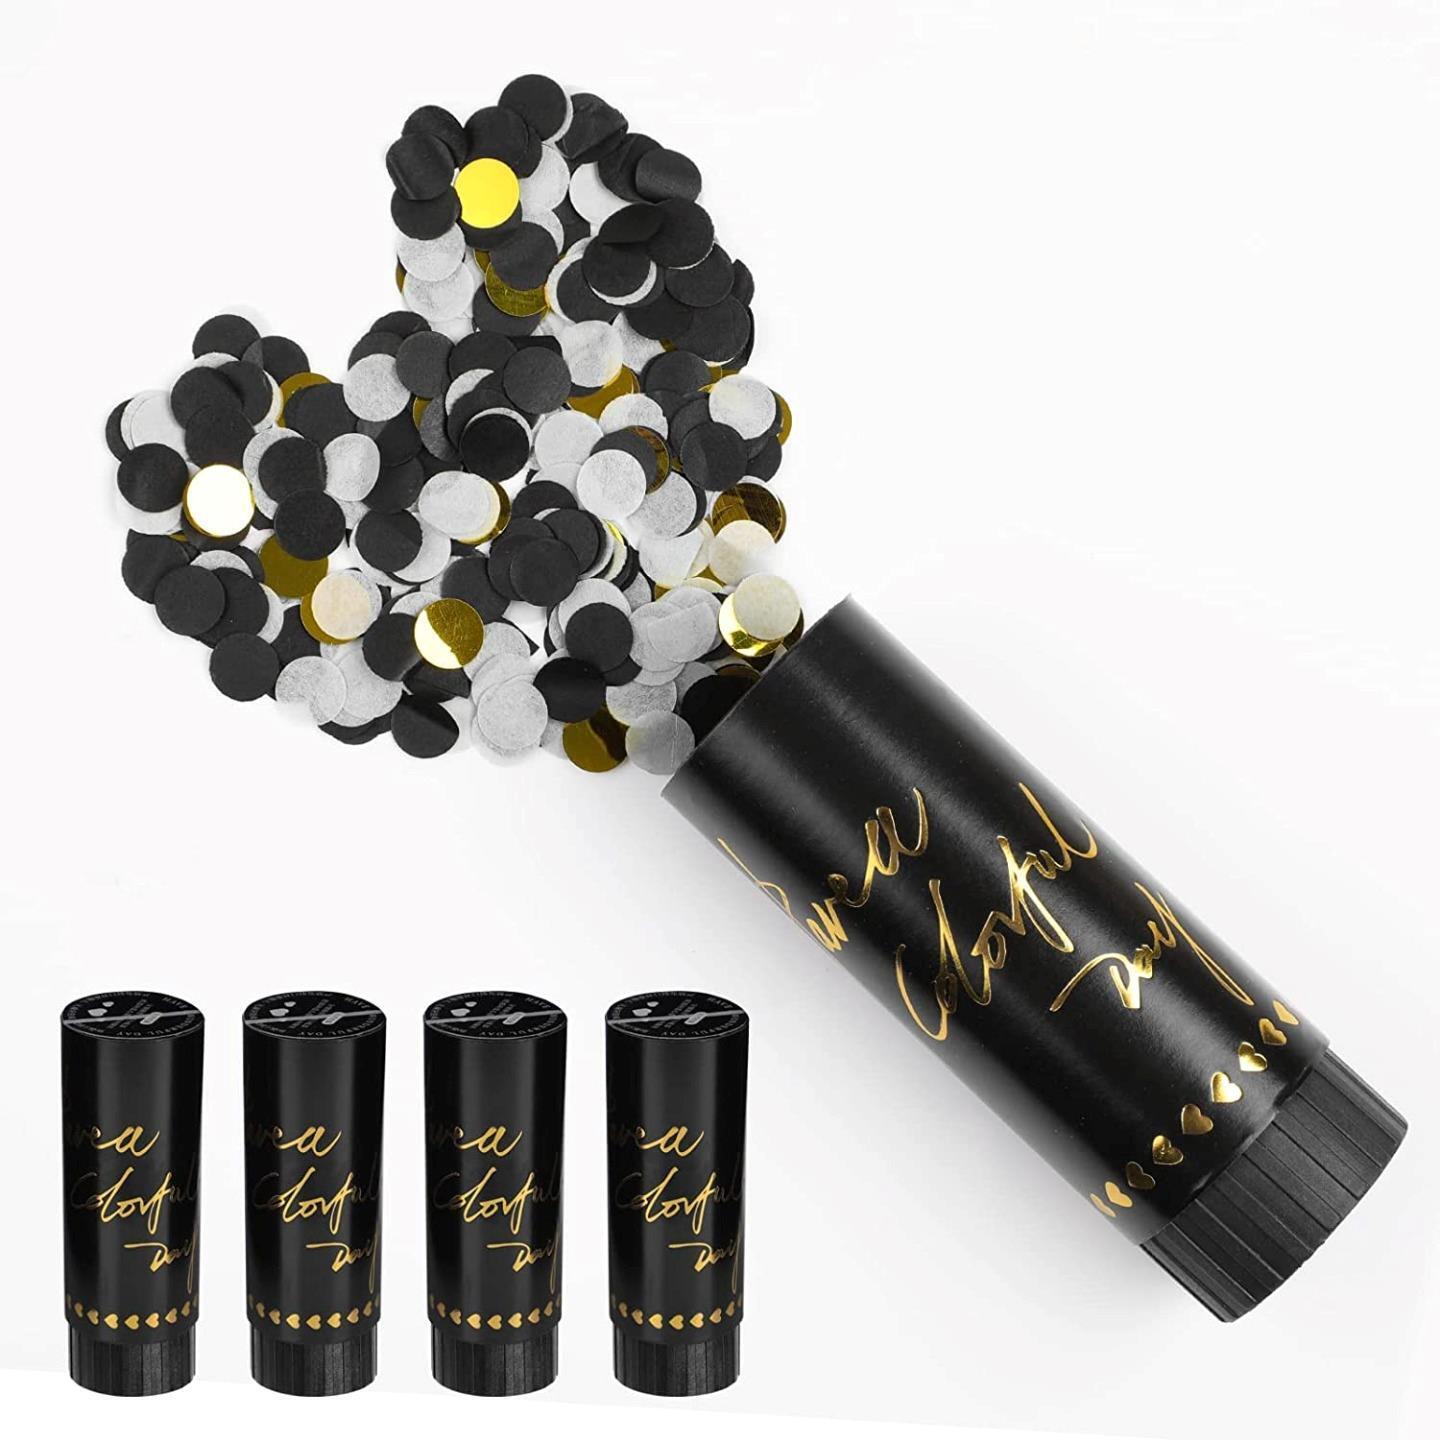 Best Wishes To You 4 Piece Party Black Confetti Cannons RRP £5.50 CLEARANCE XL £3.99